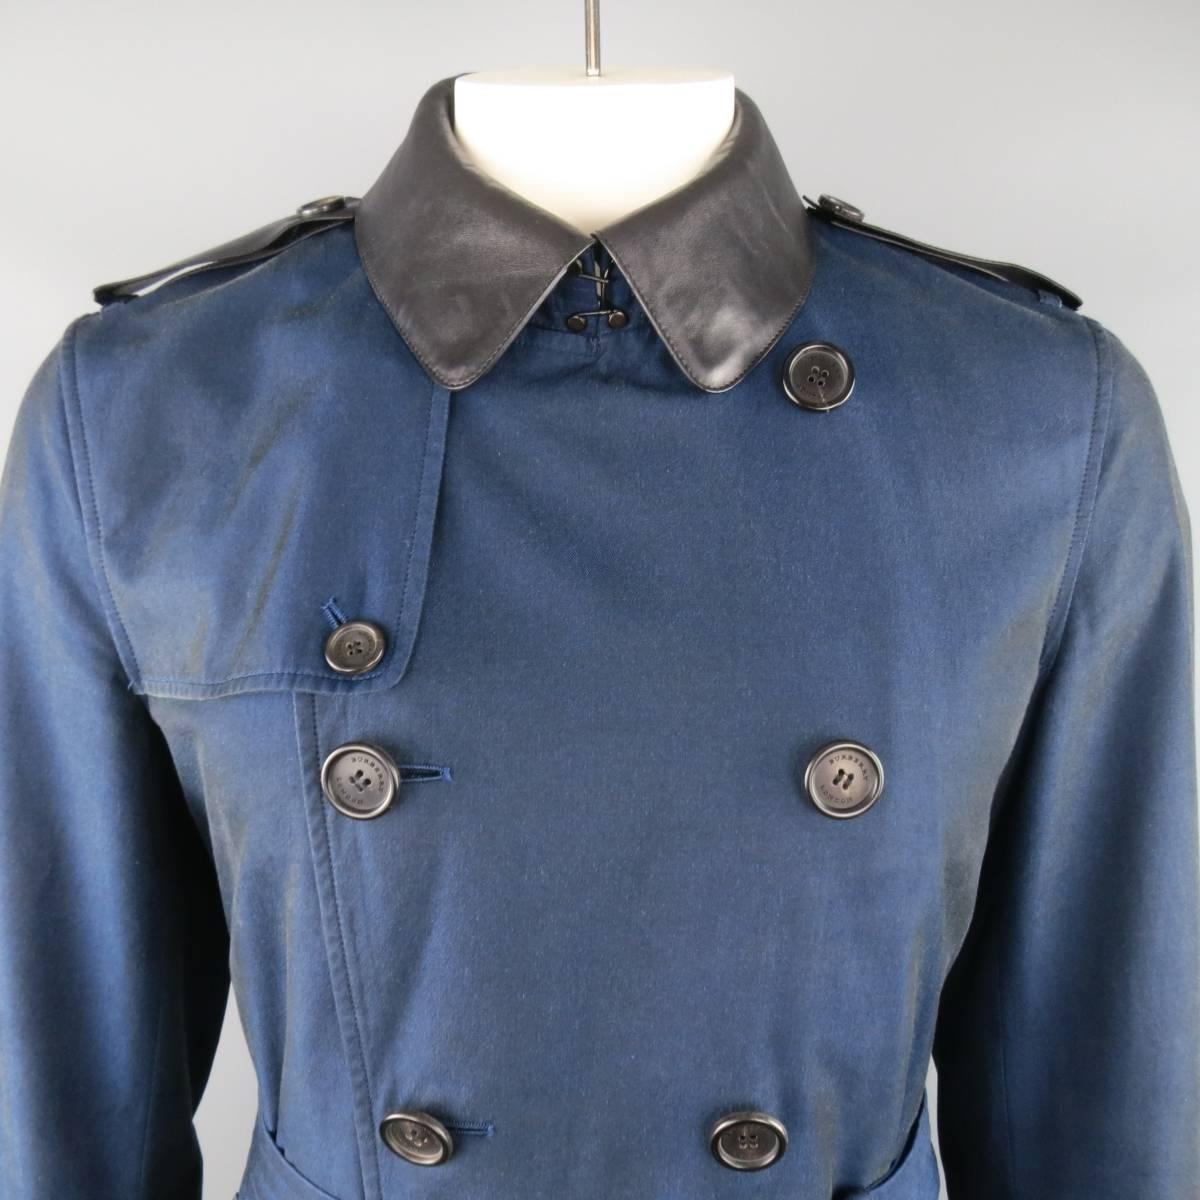 BURBERRY LONDON tranch coat comes in a navy blue cotton with a sharkskin iridescent sheen and features a double breasted button front, storm flap, belted waist, and black leather collar, epaulets, and and buff belts. Detachable leather collar. Made